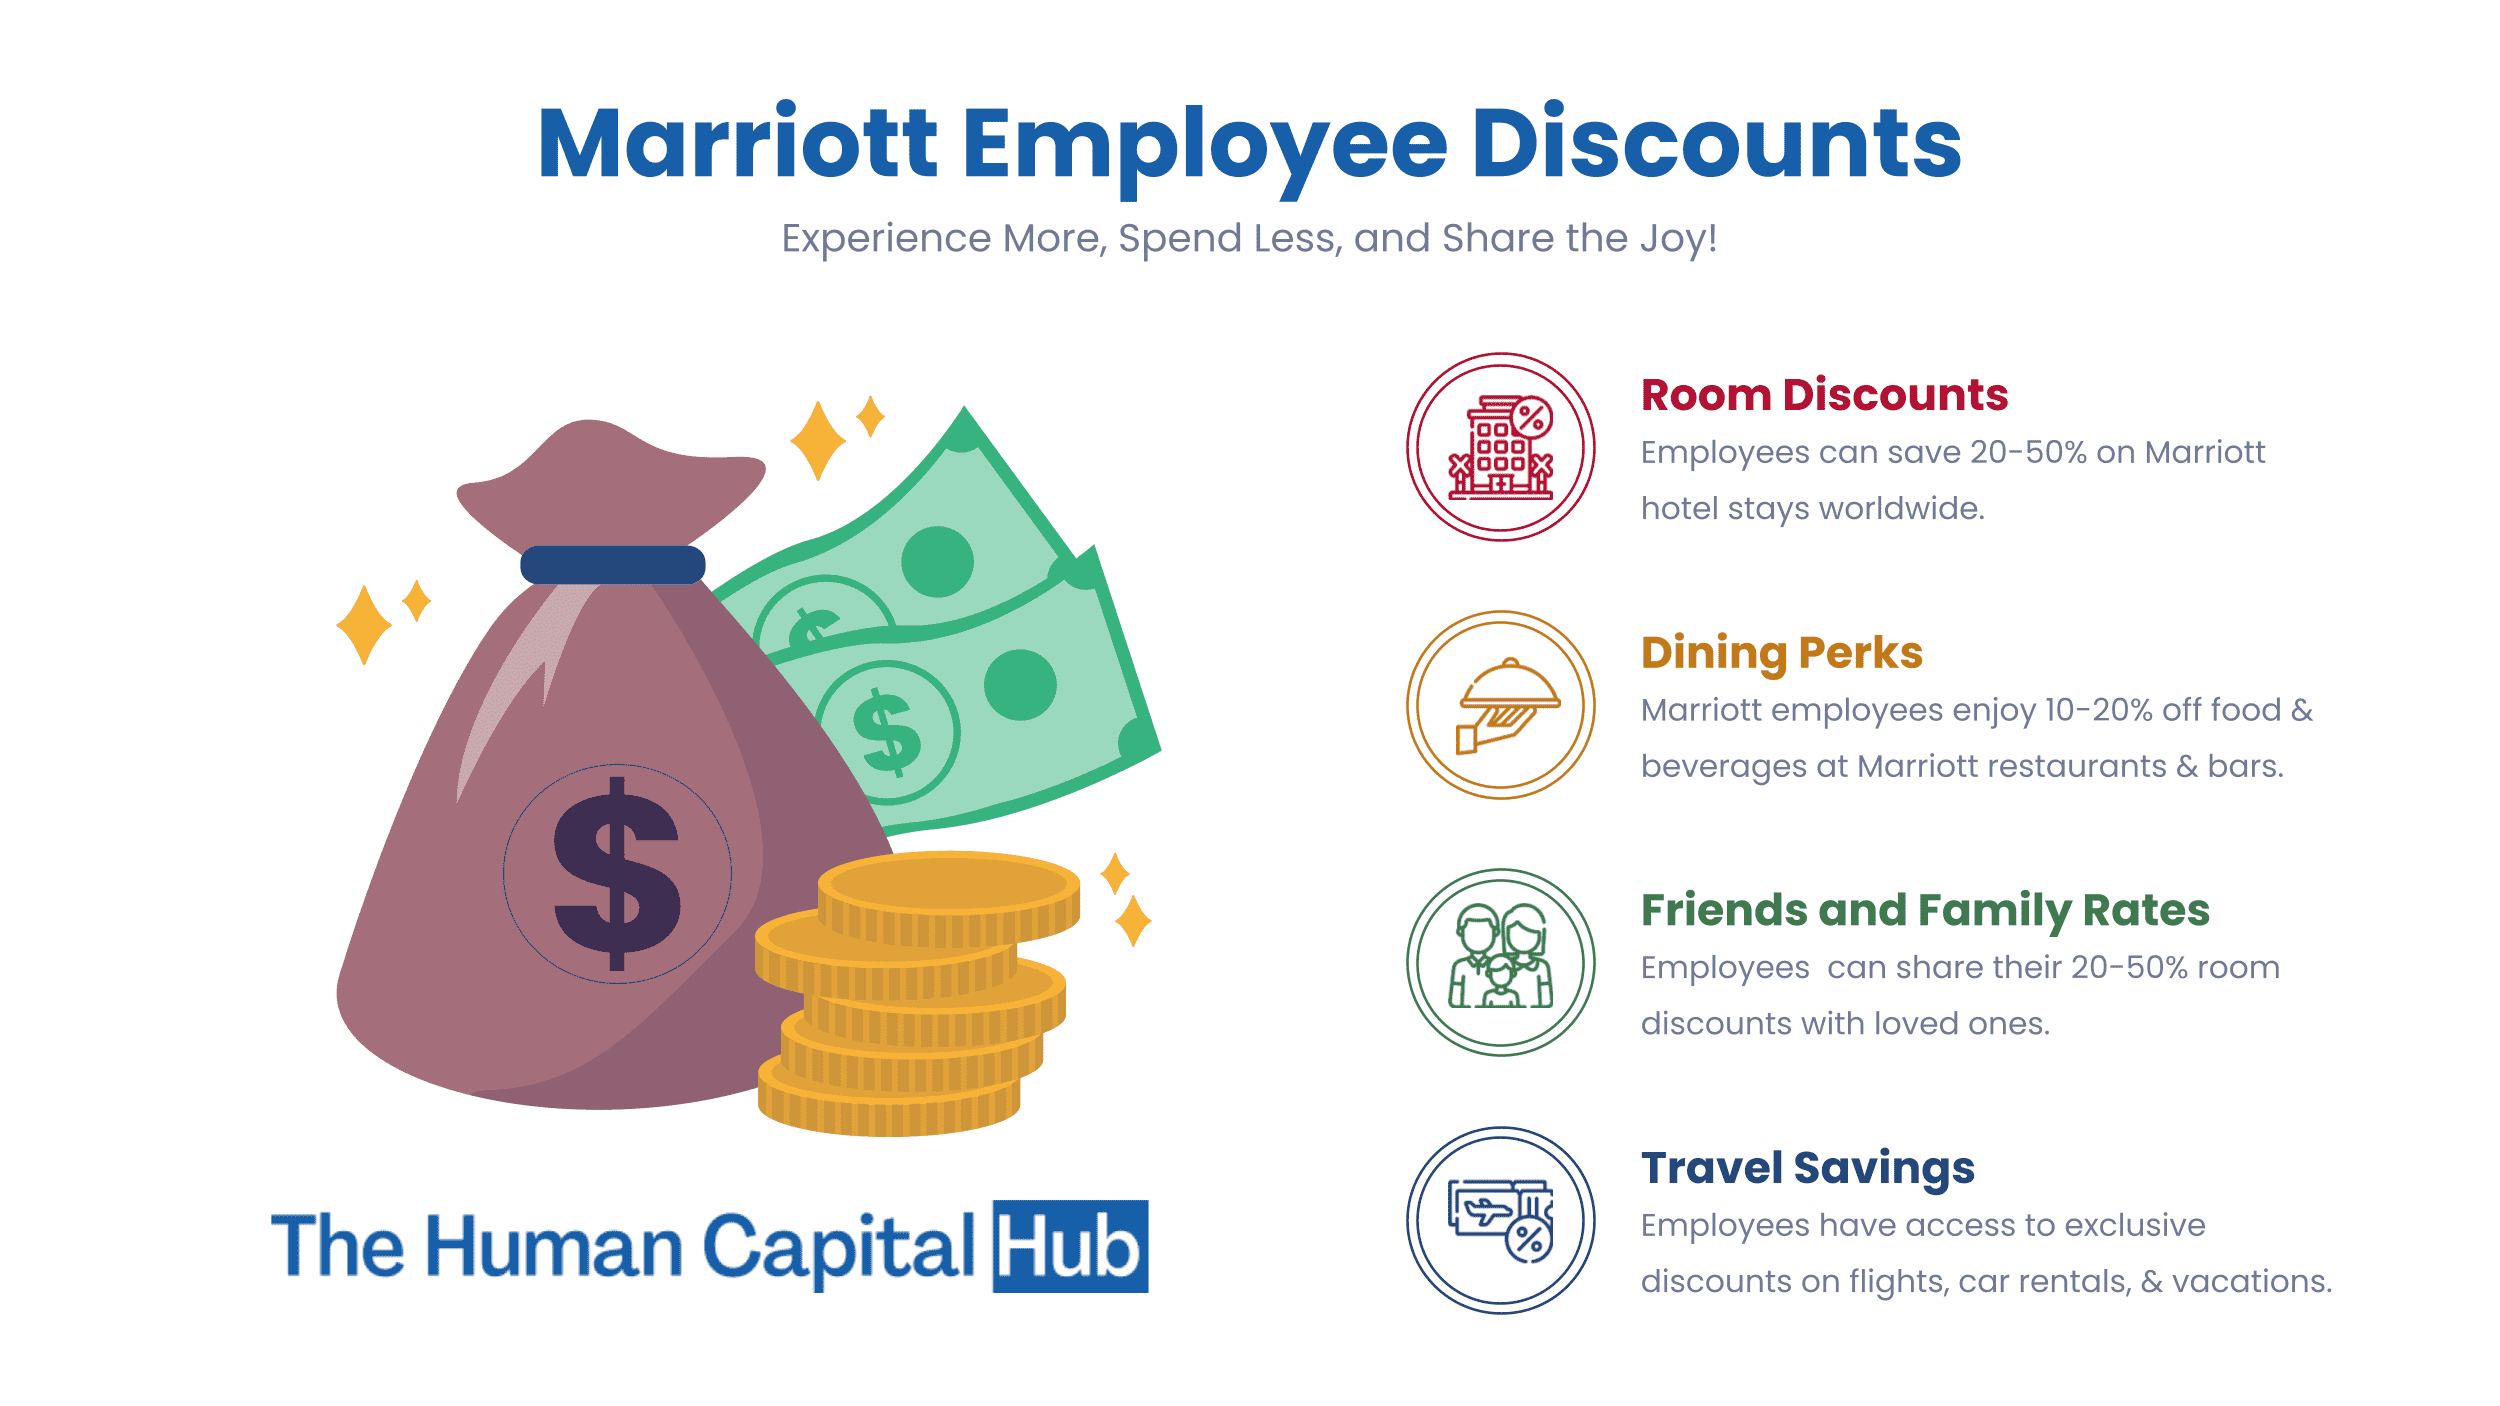 Marriott Employee Discounts: Everything you Need to Know